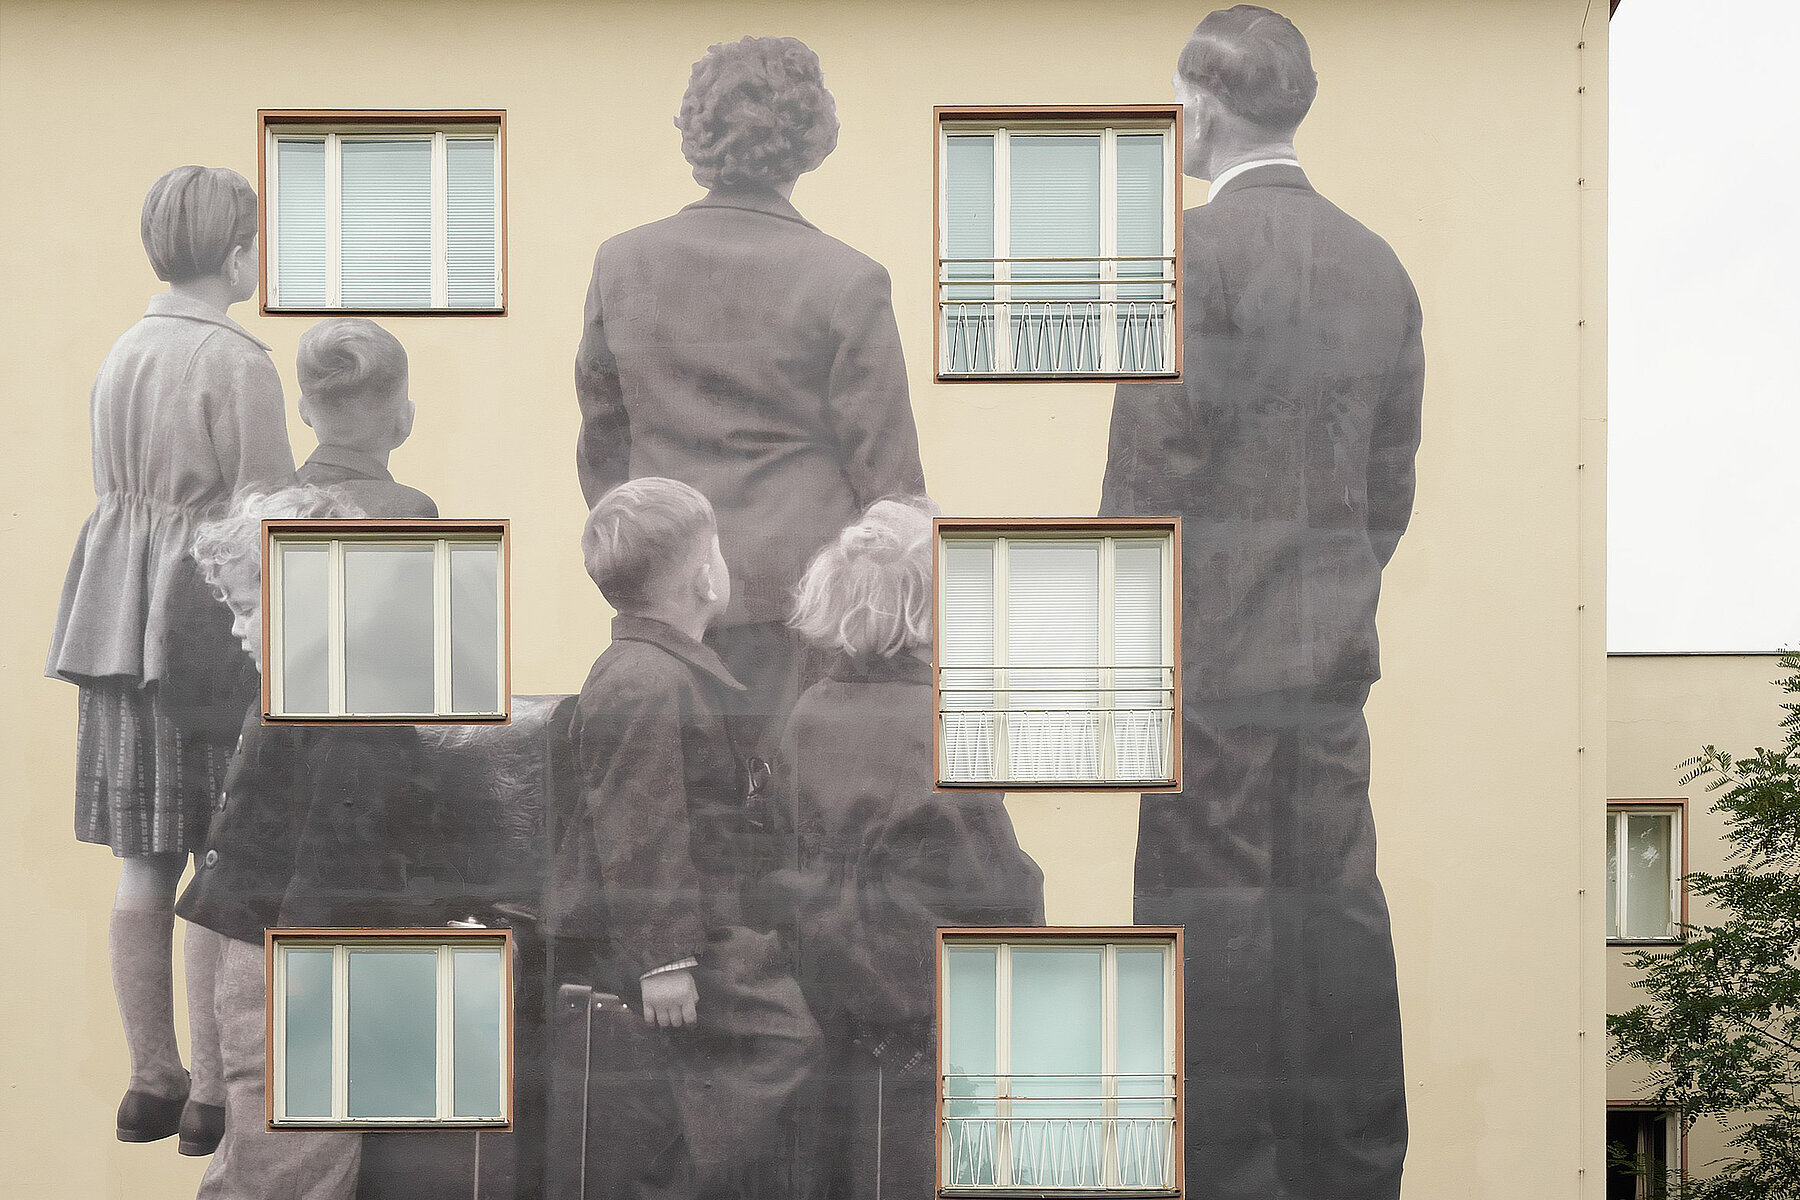 On one façade there is a mural that extends over three storeys. It depicts a family in black and white consisting of a woman, a man and four children. 